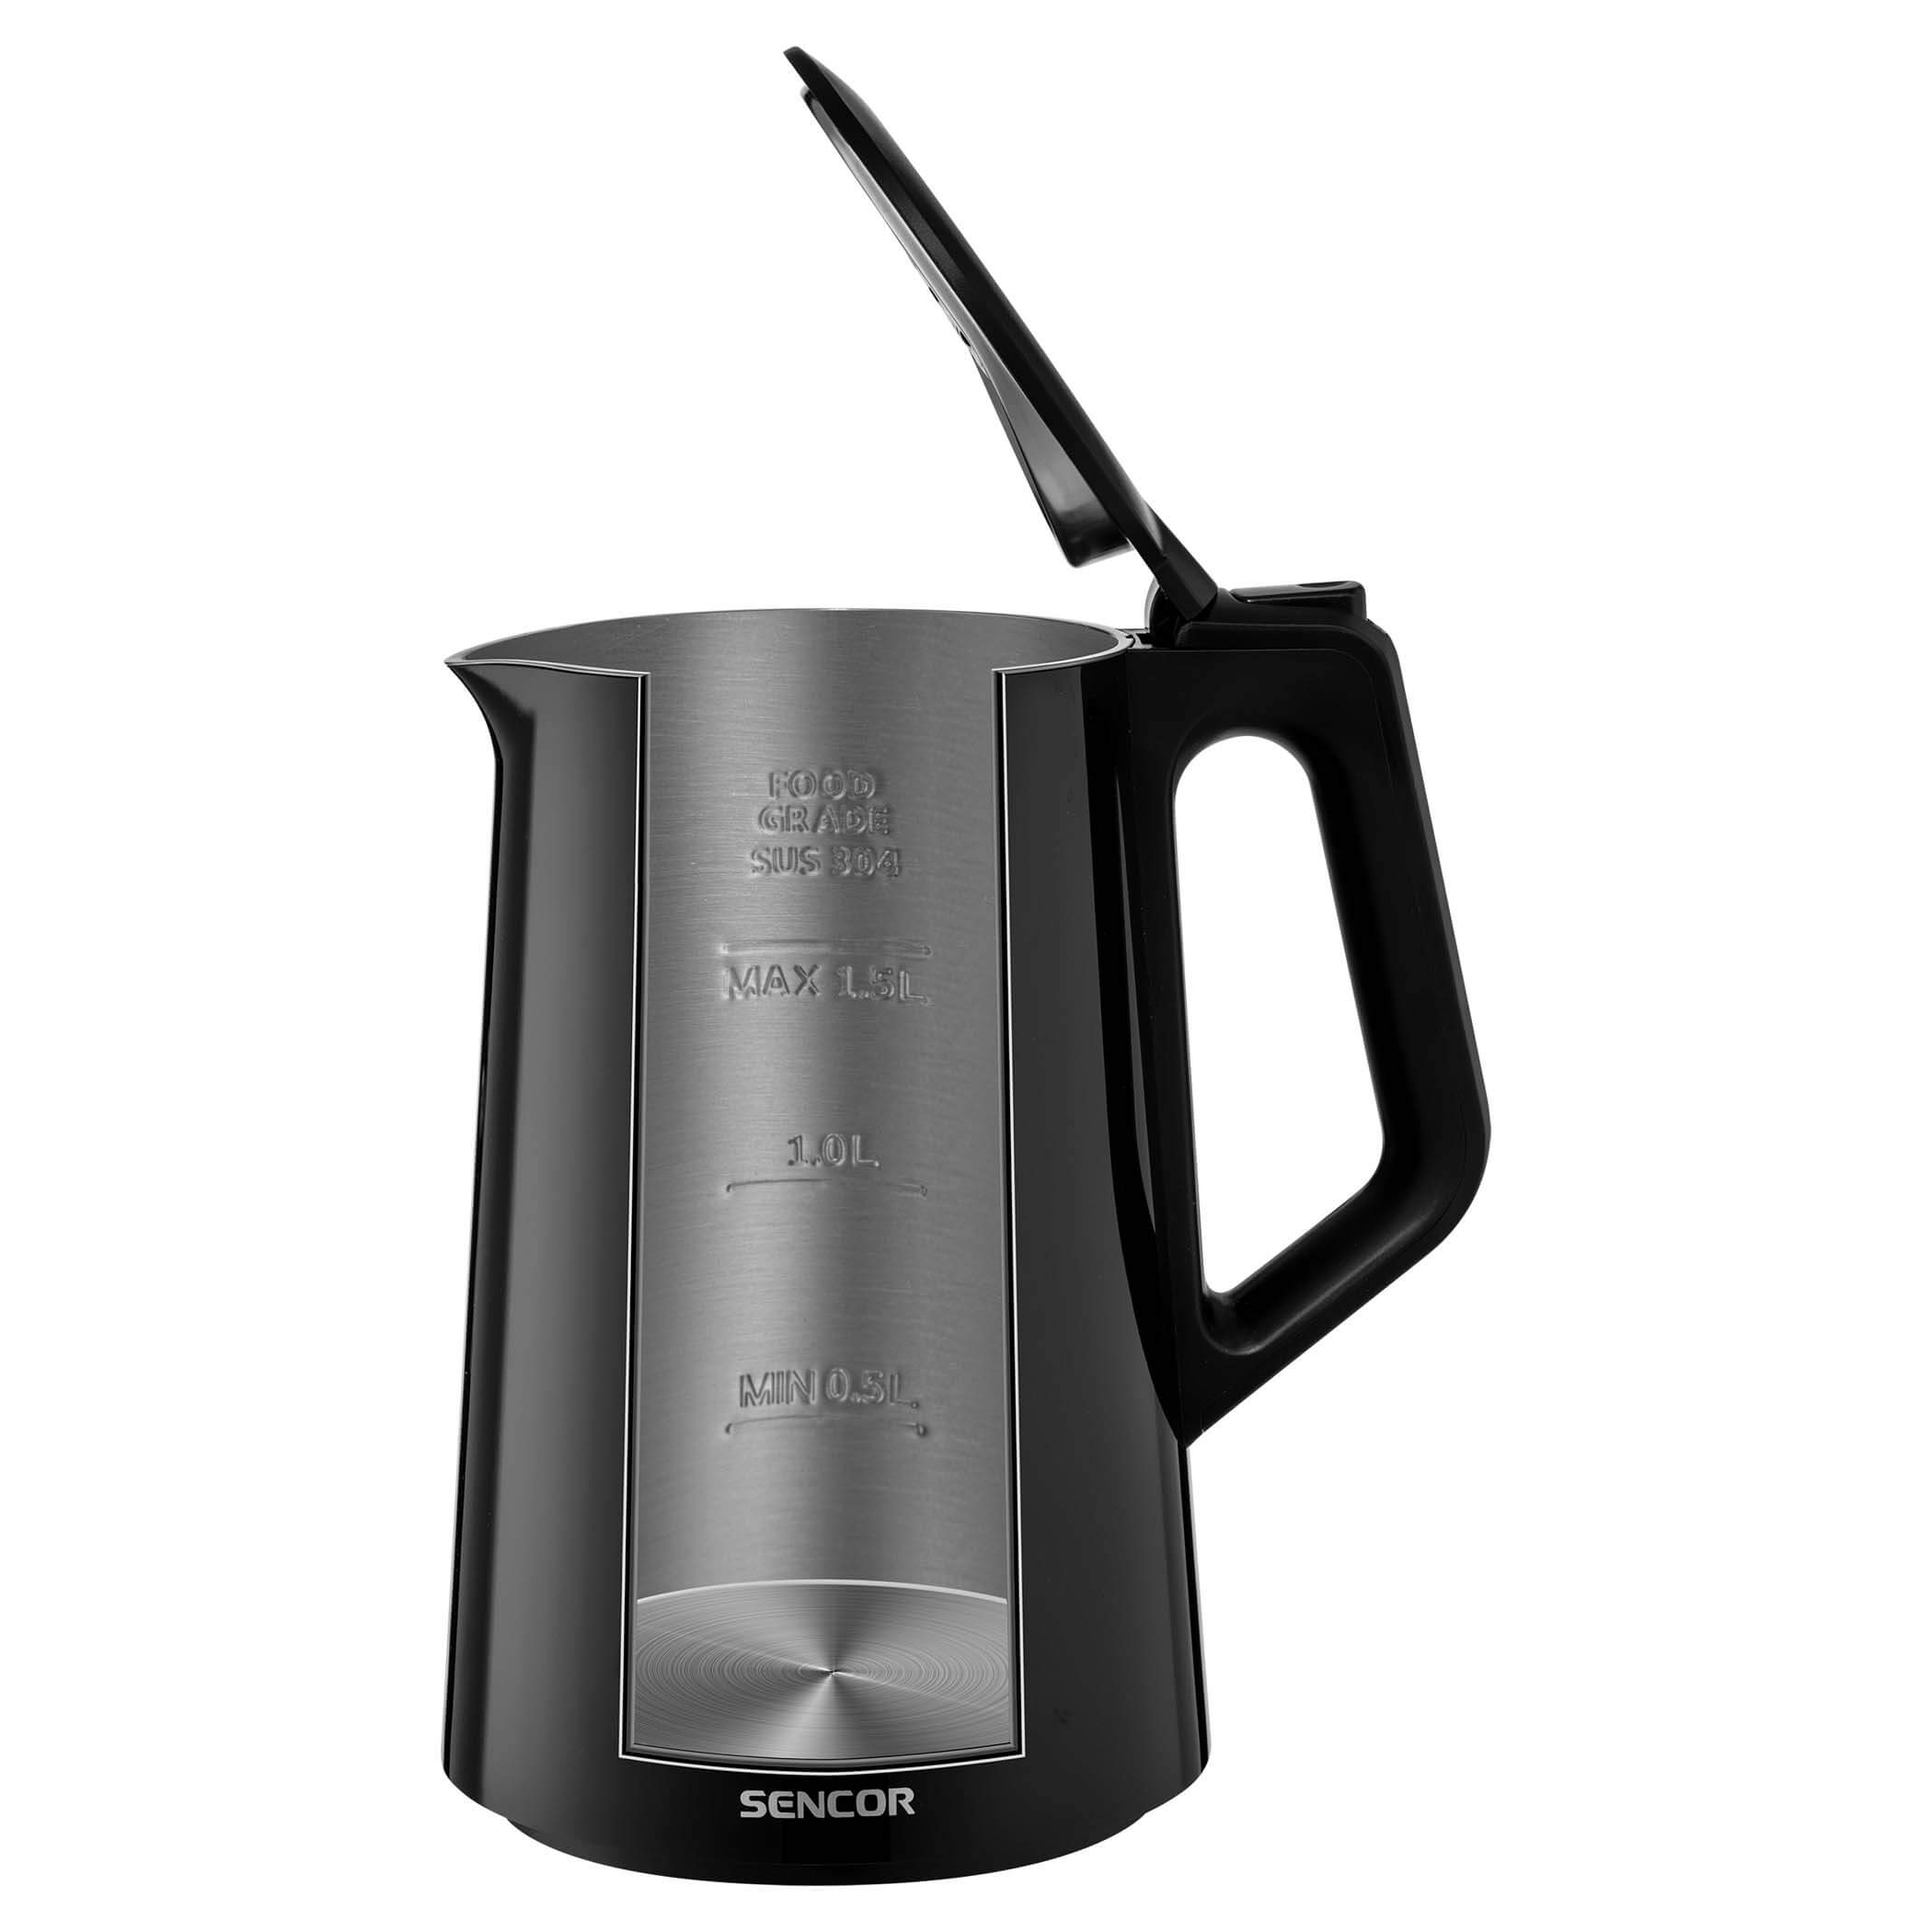 Sencor SWK1573CO Electric Kettle with Display and Power Cord Base, Copper  (Metallic) 